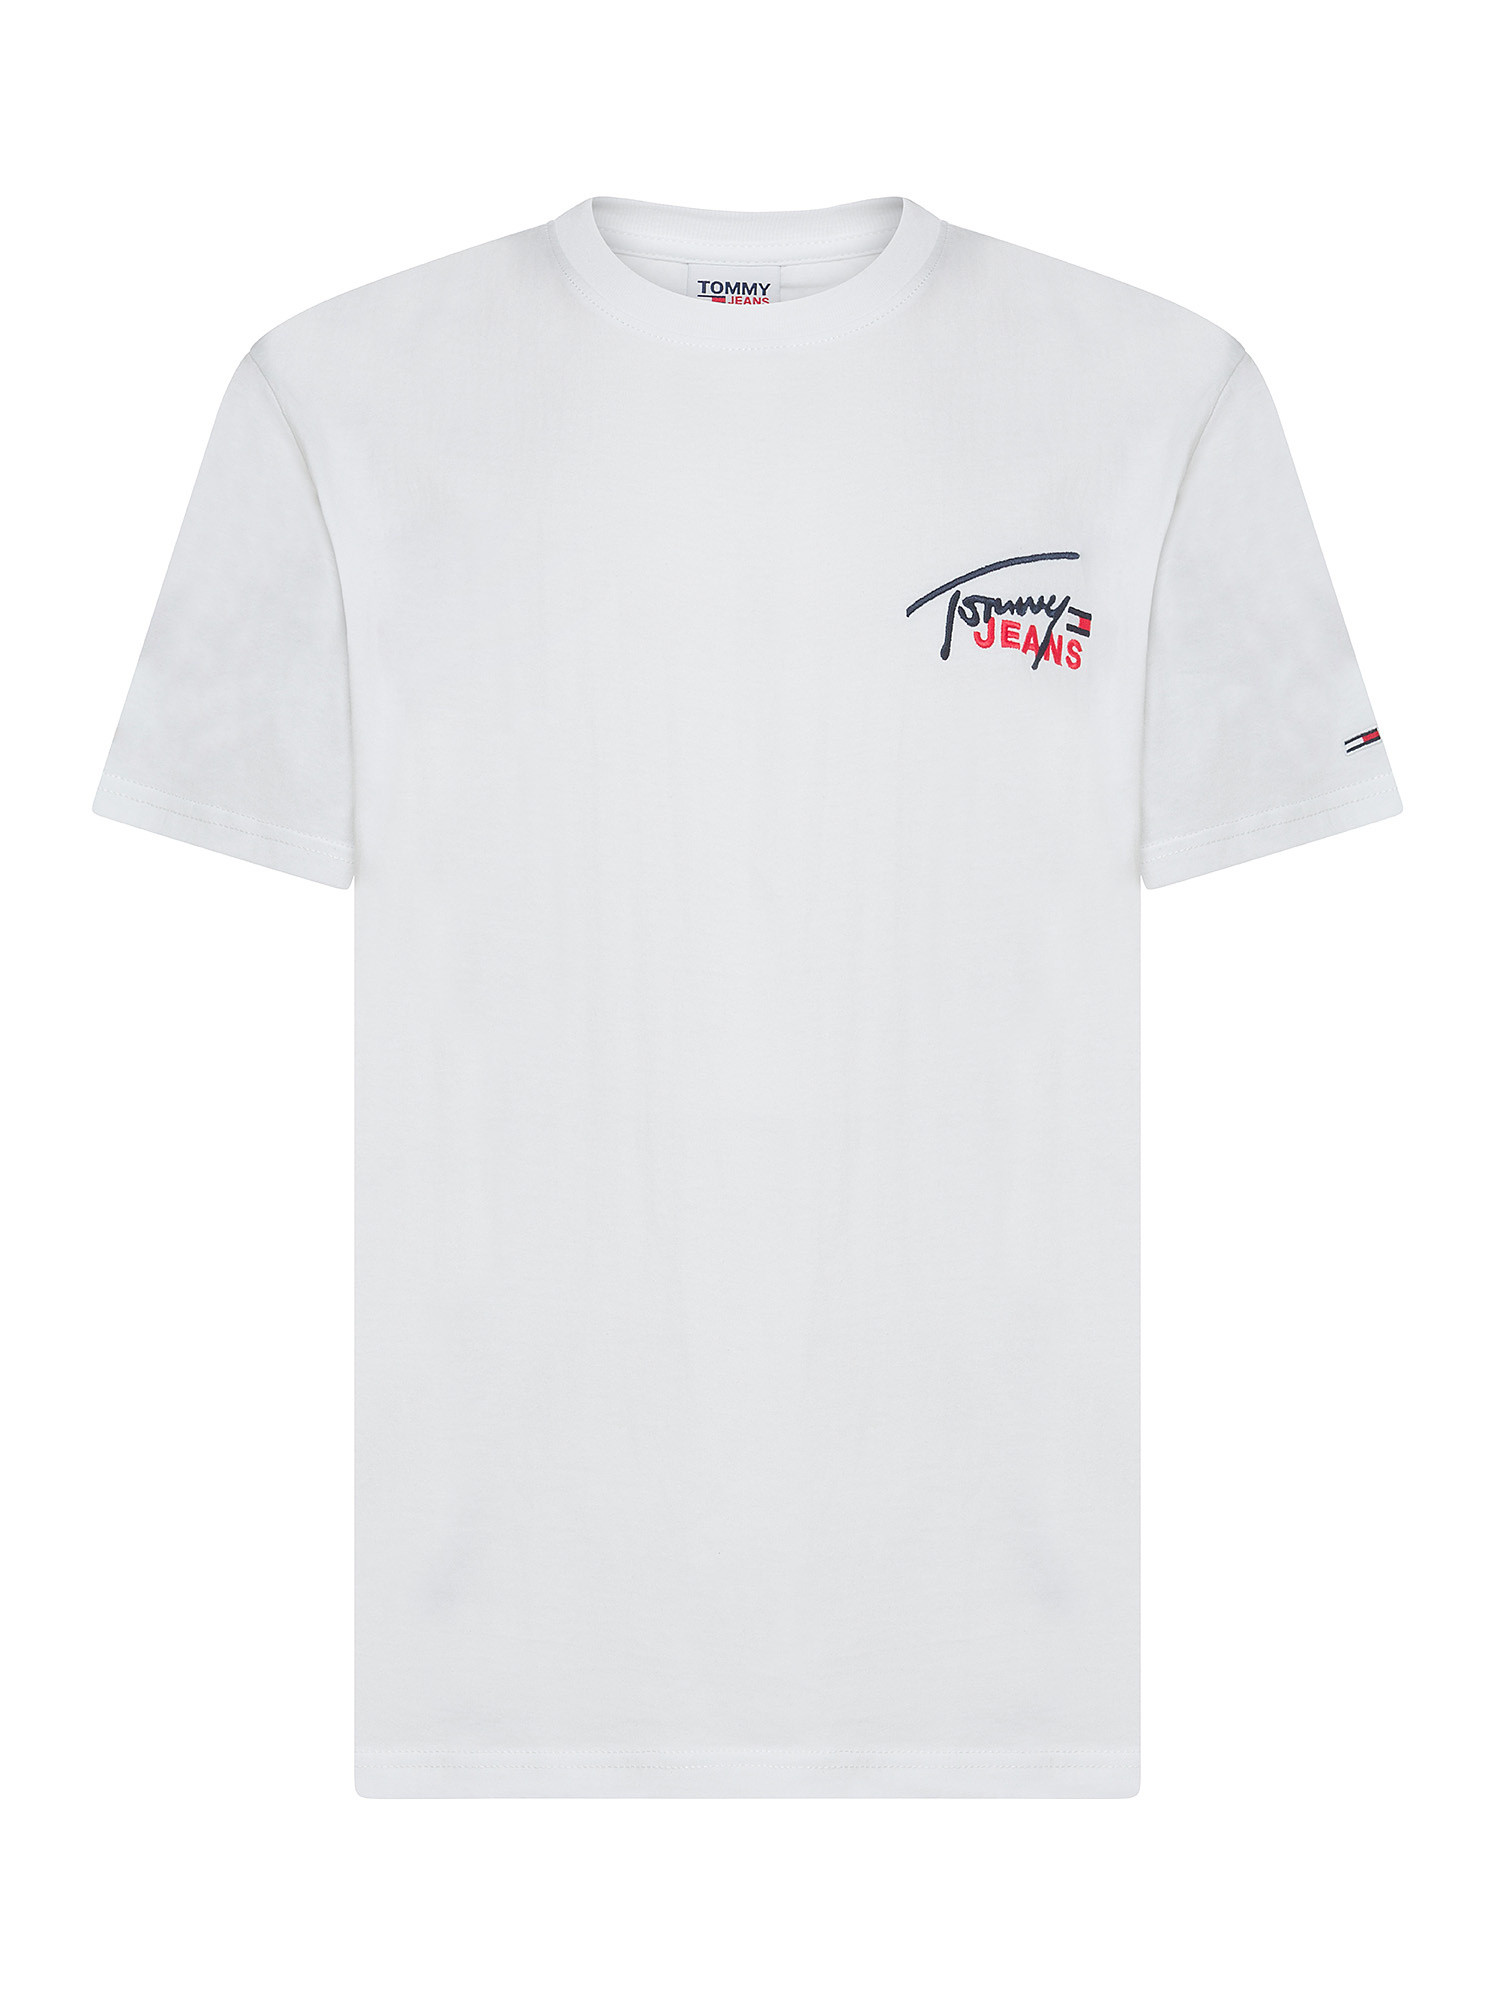 Tommy Jeans - Crew neck cotton T-shirt with embroidered logo, White, large image number 0